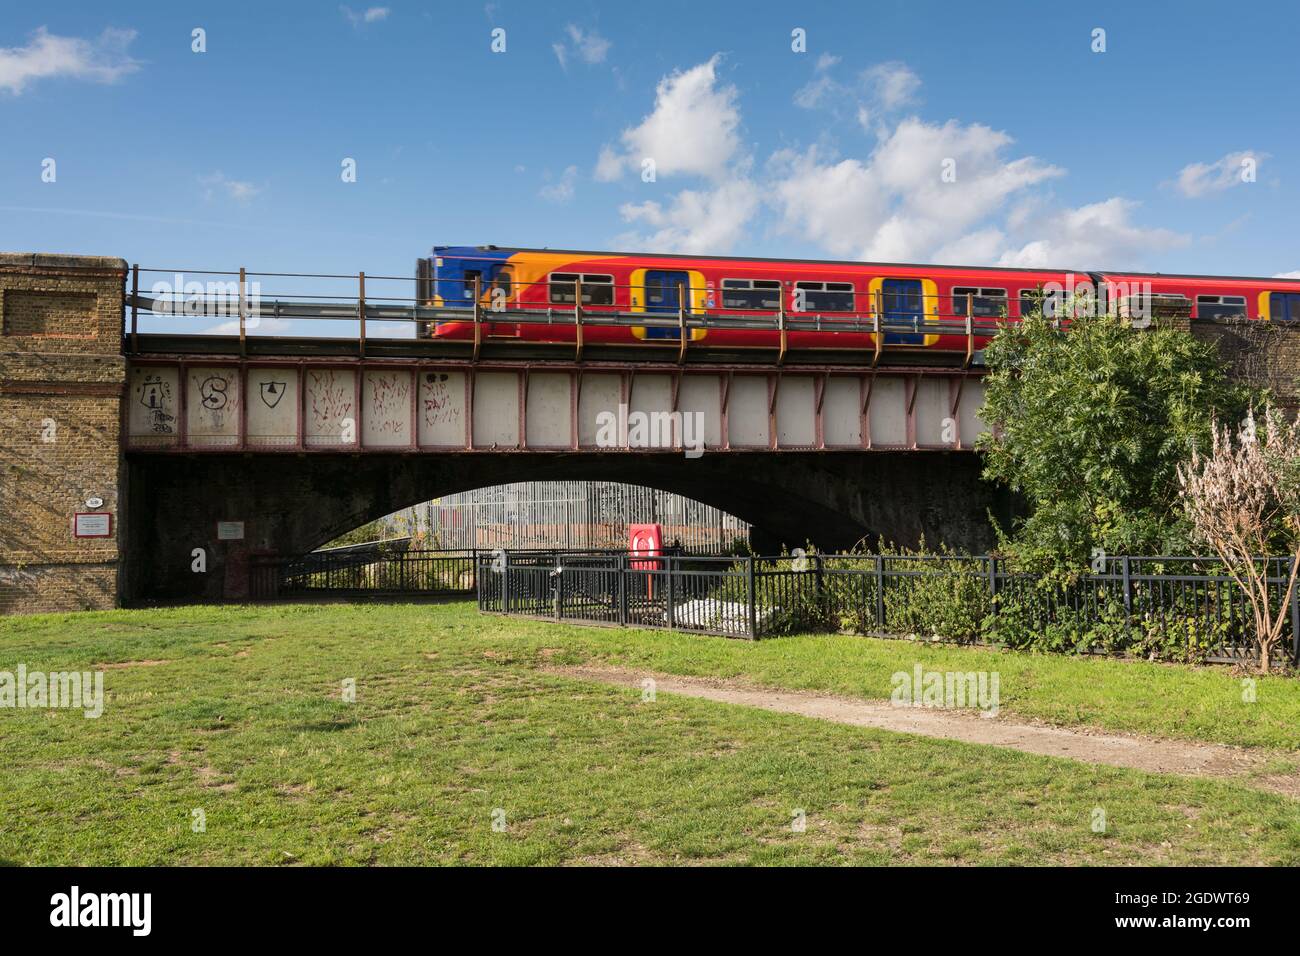 A South Western Railway commuter train passing over the River Wandle, a tributary of the River Thames, in Wandsworth, London, England, UK Stock Photo